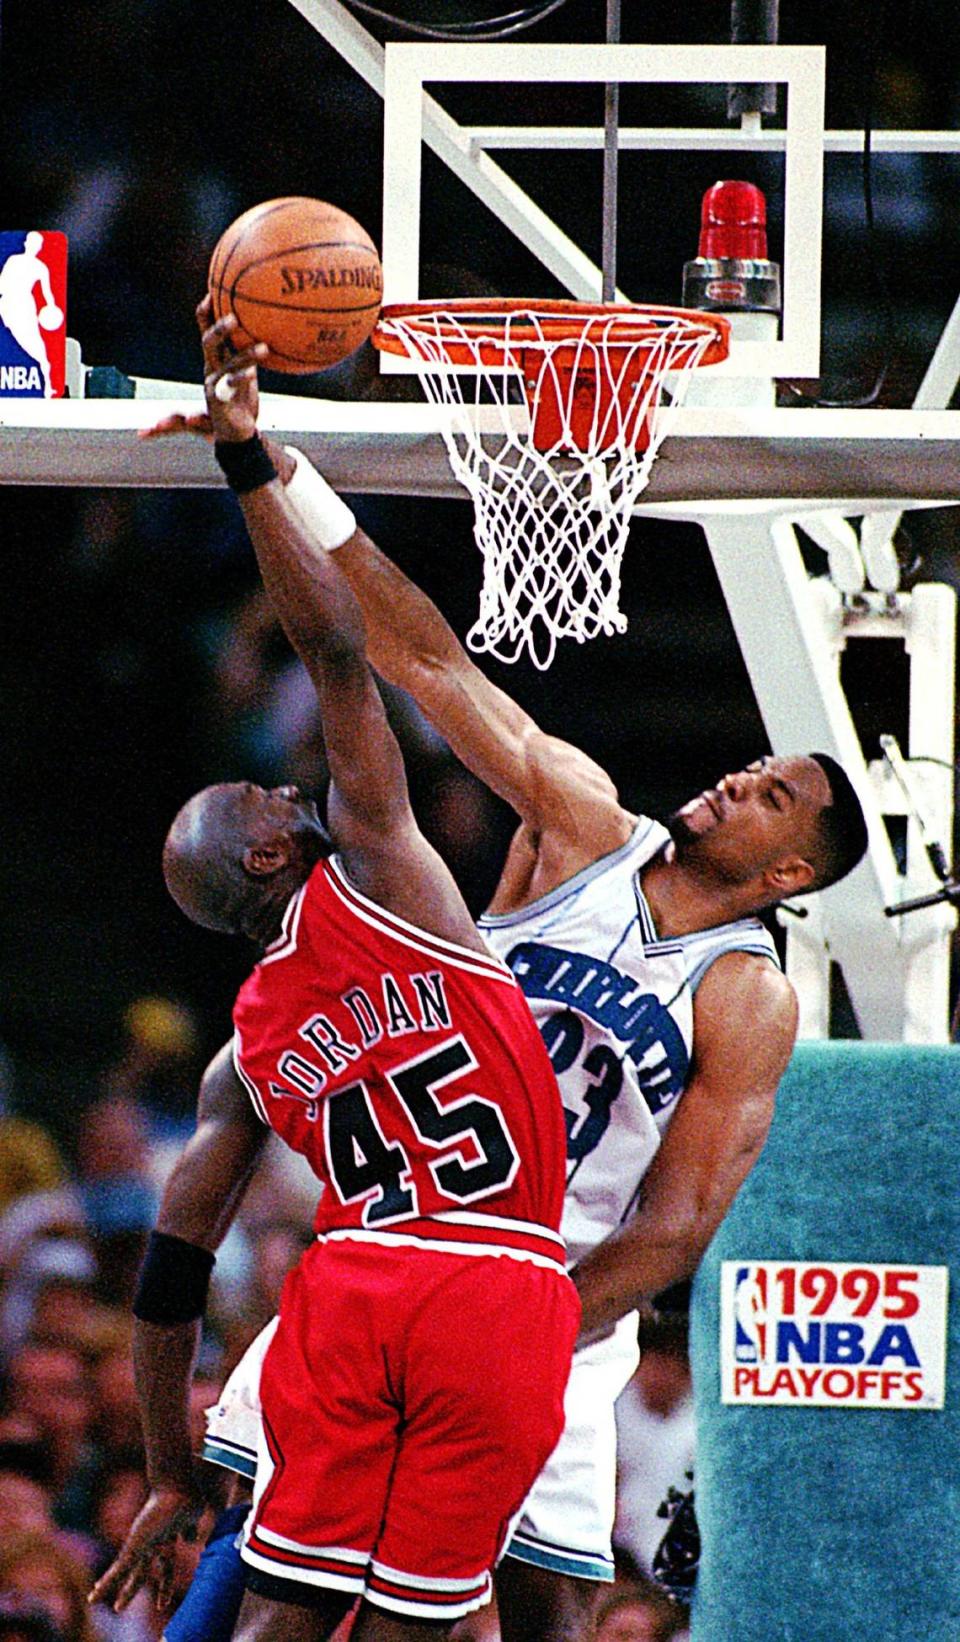 Alonzo Mourning rejects any notion of a Michael Jordan dunk in a Charlotte playoff victory on April 30, 1995.